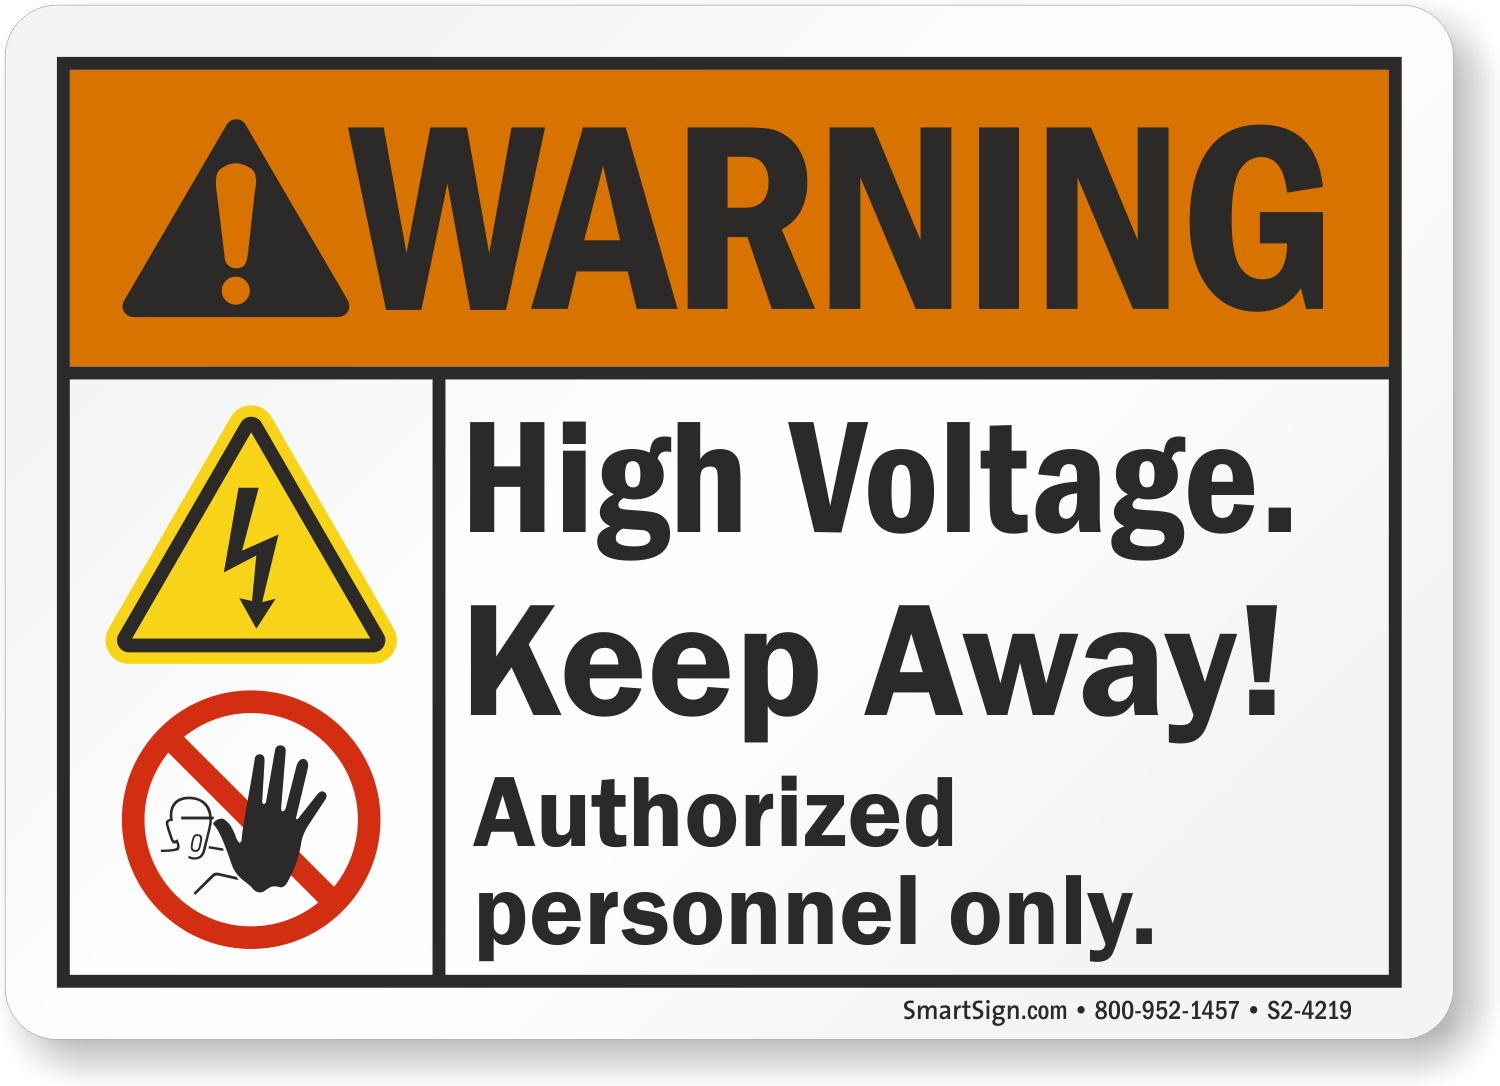 SmartSign Danger 10 x 7 10 x 7 Lyle Signs S-2242-PL-10 Plastic Sign High Voltage Keep Away with Graphic 